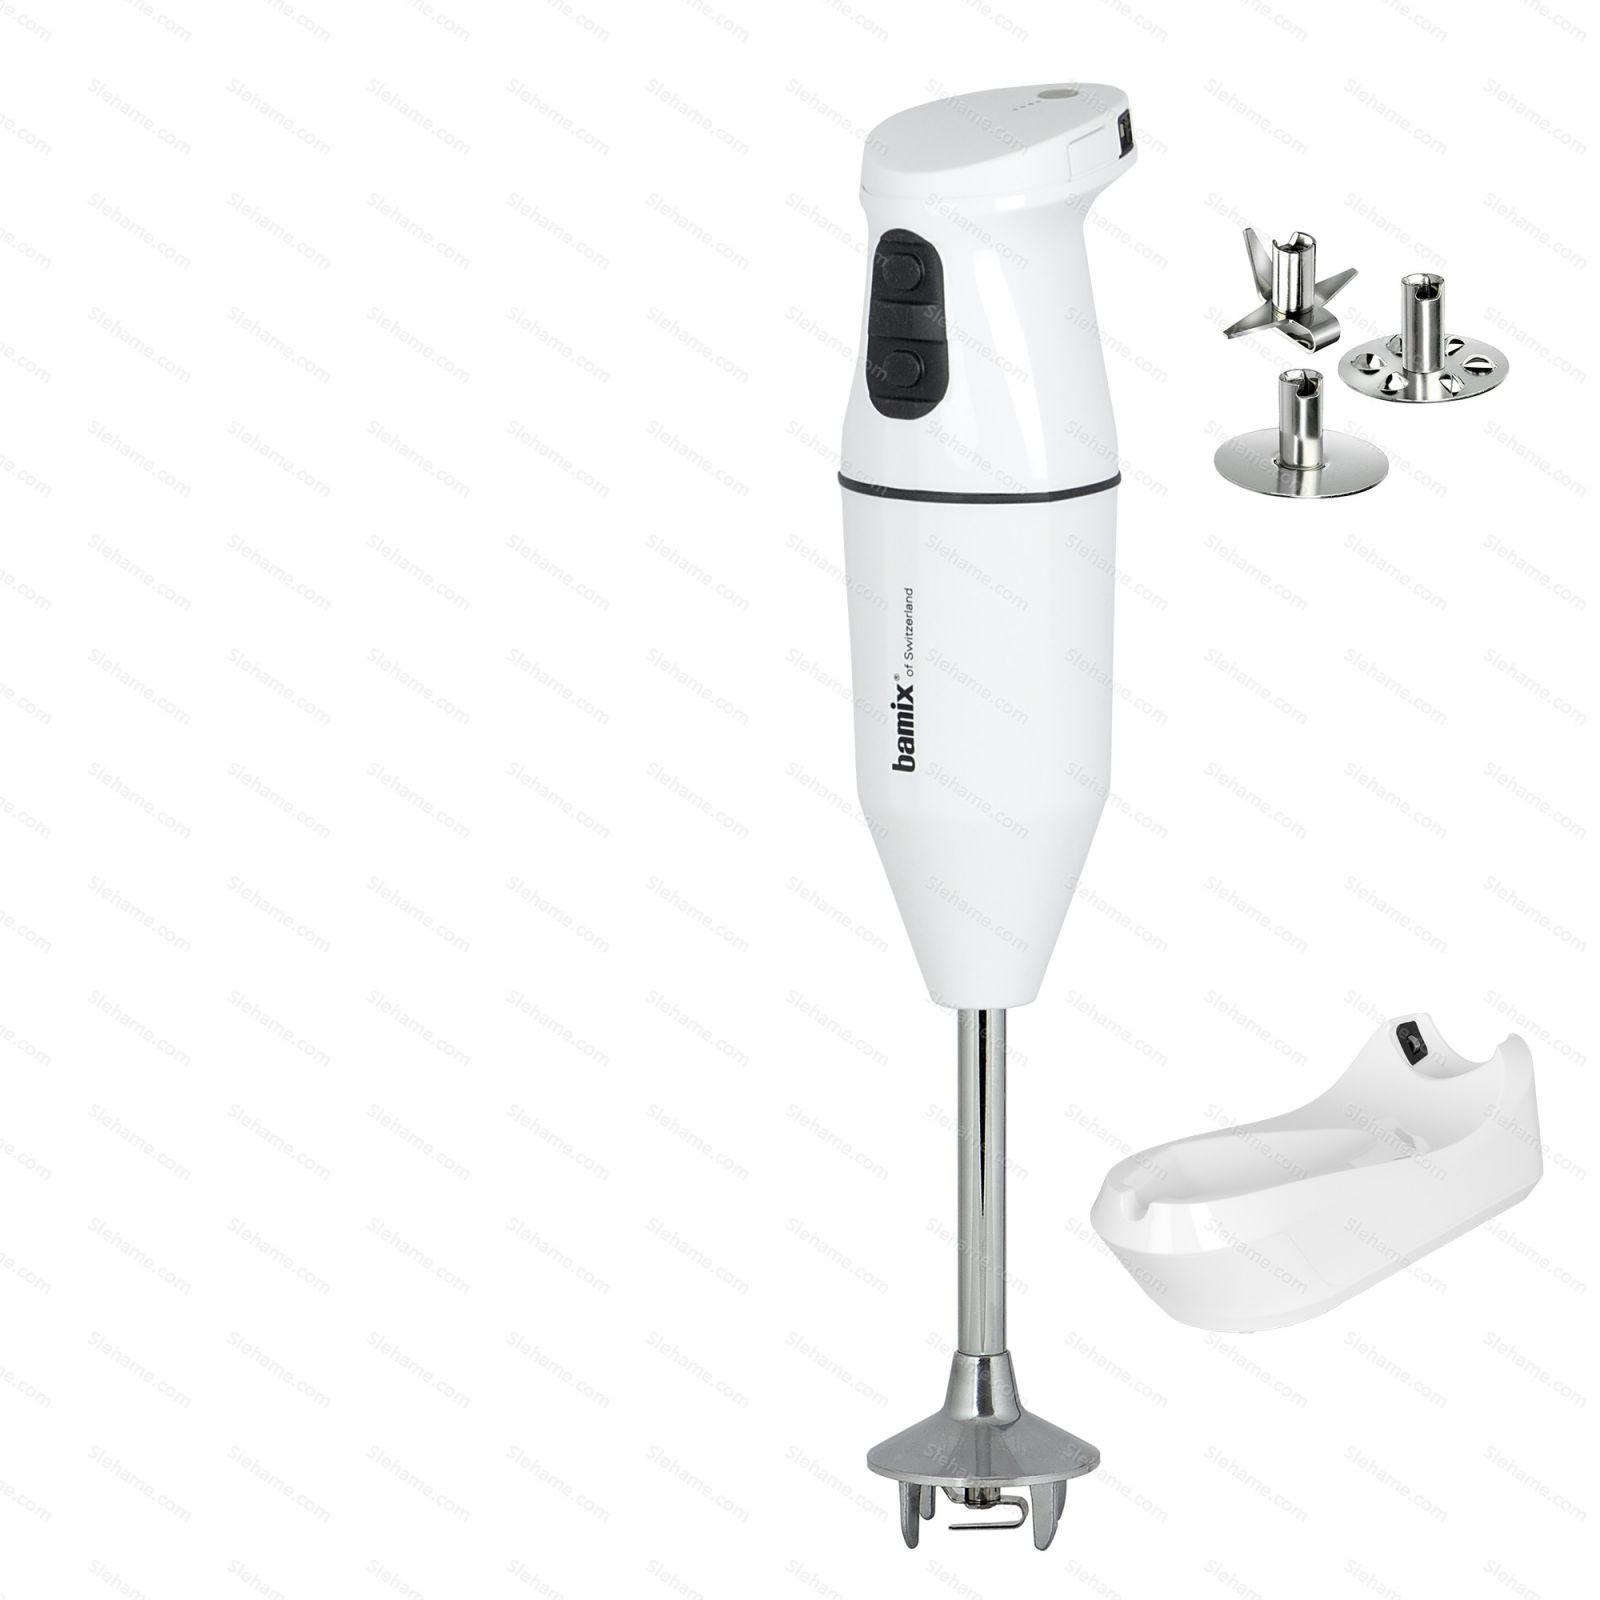 Wireless stick blender bamix CORDLESS PLUS, white - package content